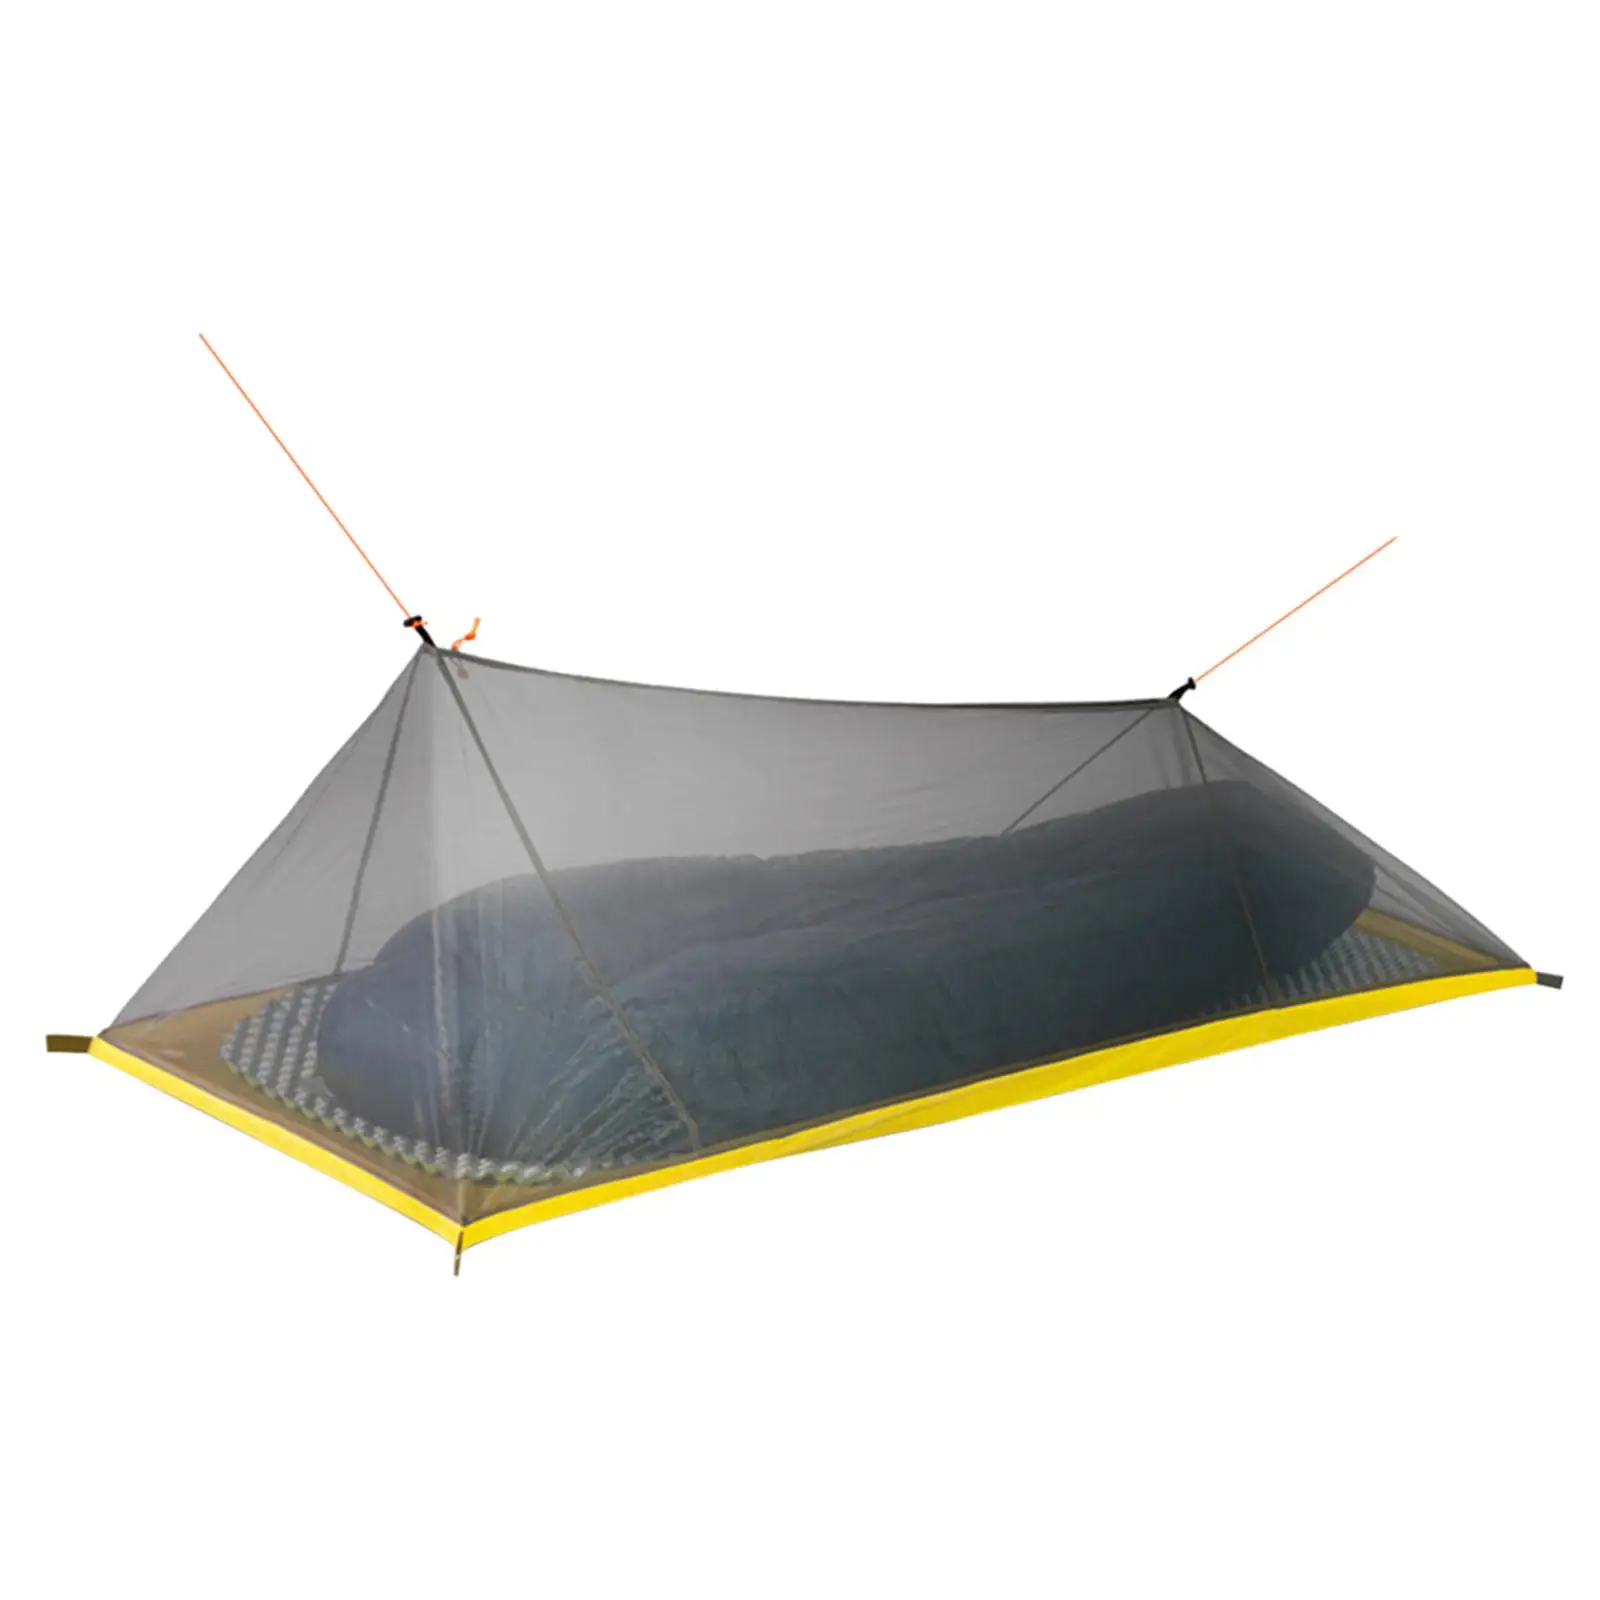 Camping Tent Single Layer with Storage Bag Rainproof Ultralight Windproof Tent for Backpacking Outdoor Hiking Yard